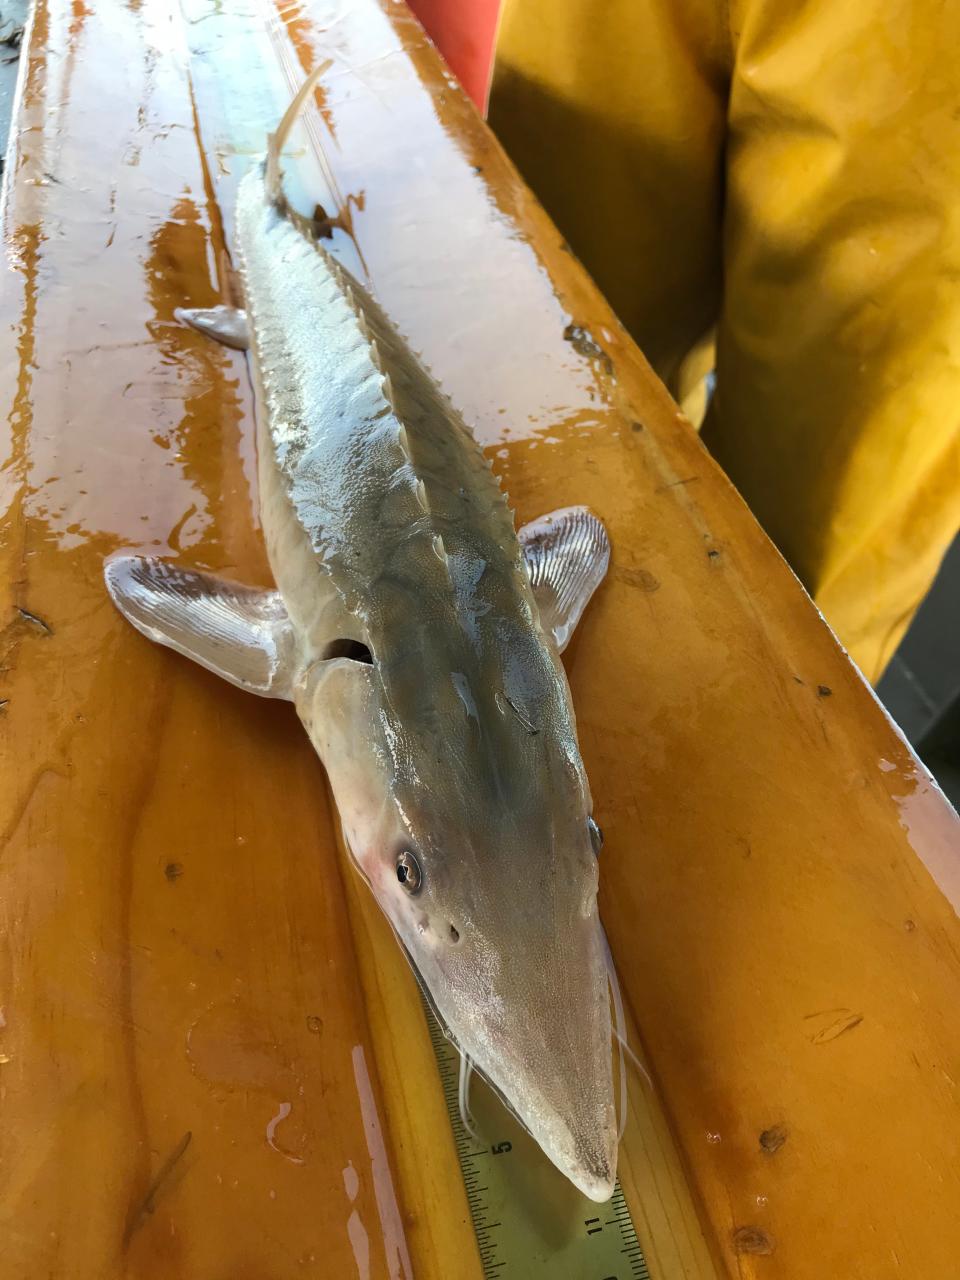 A lake sturgeon caught by members of the Michigan Department of Natural Resources